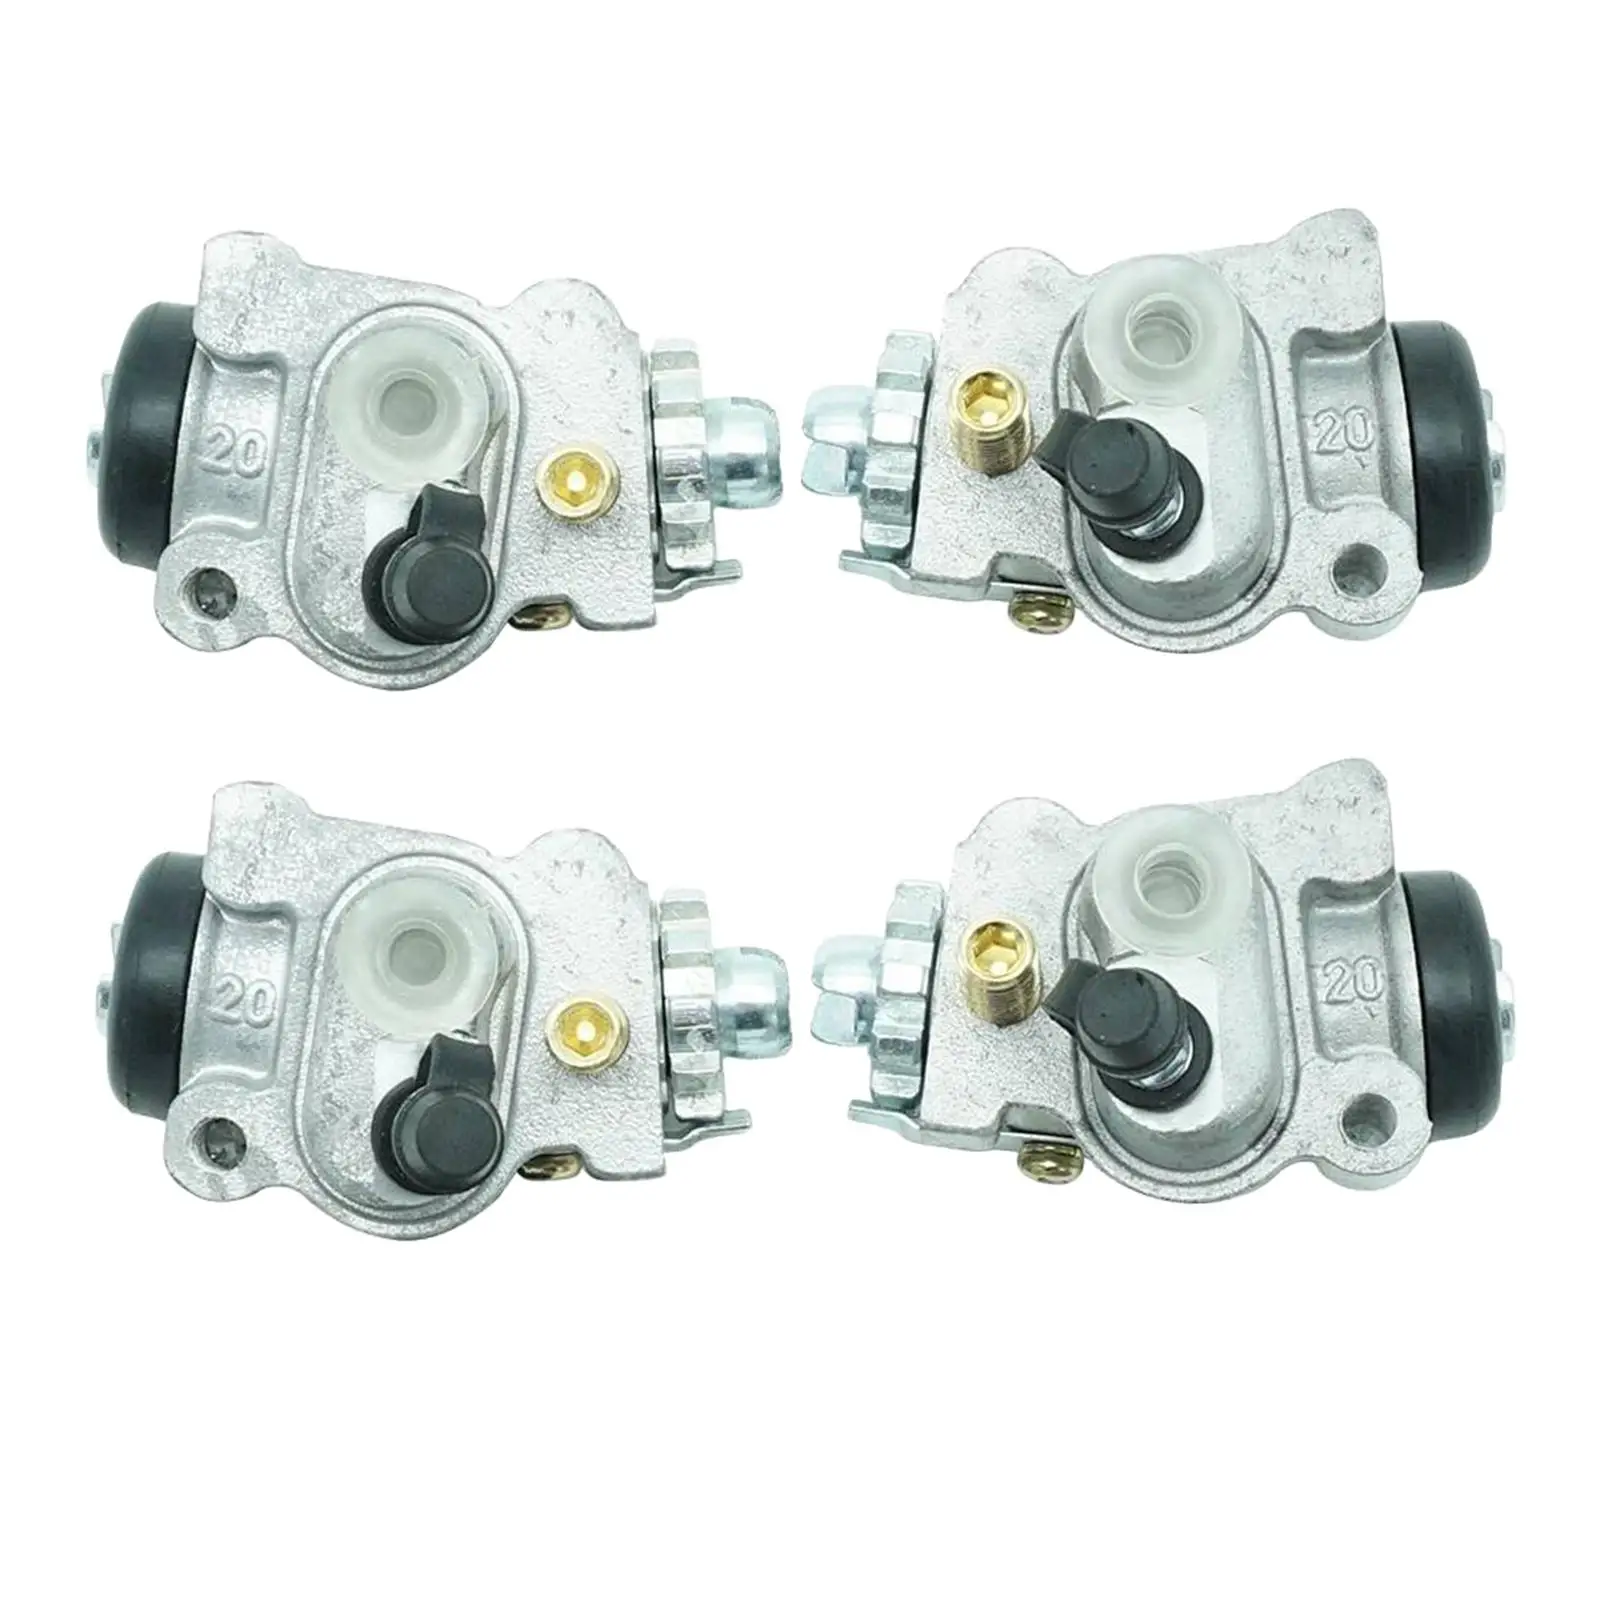 4x 45310-Hn0-A01 Front Brake Wheel Cylinders for Foreman 450 TRX450 Replacement Easy Installation Durable